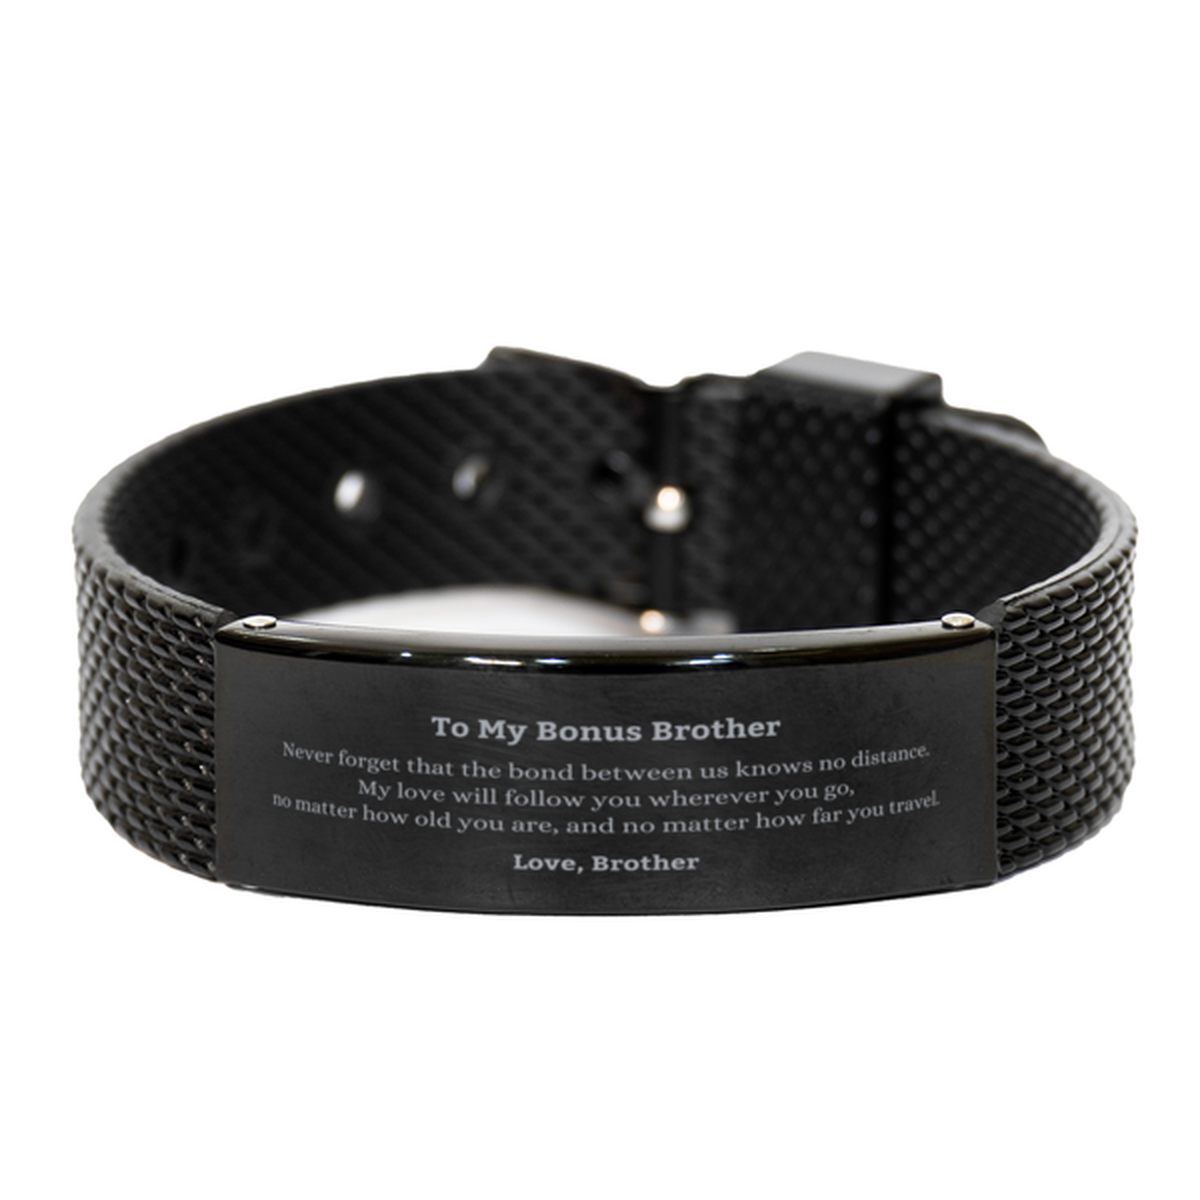 Bonus Brother Birthday Gifts from Brother, Adjustable Black Shark Mesh Bracelet for Bonus Brother Christmas Graduation Unique Gifts Bonus Brother Never forget that the bond between us knows no distance. Love, Brother